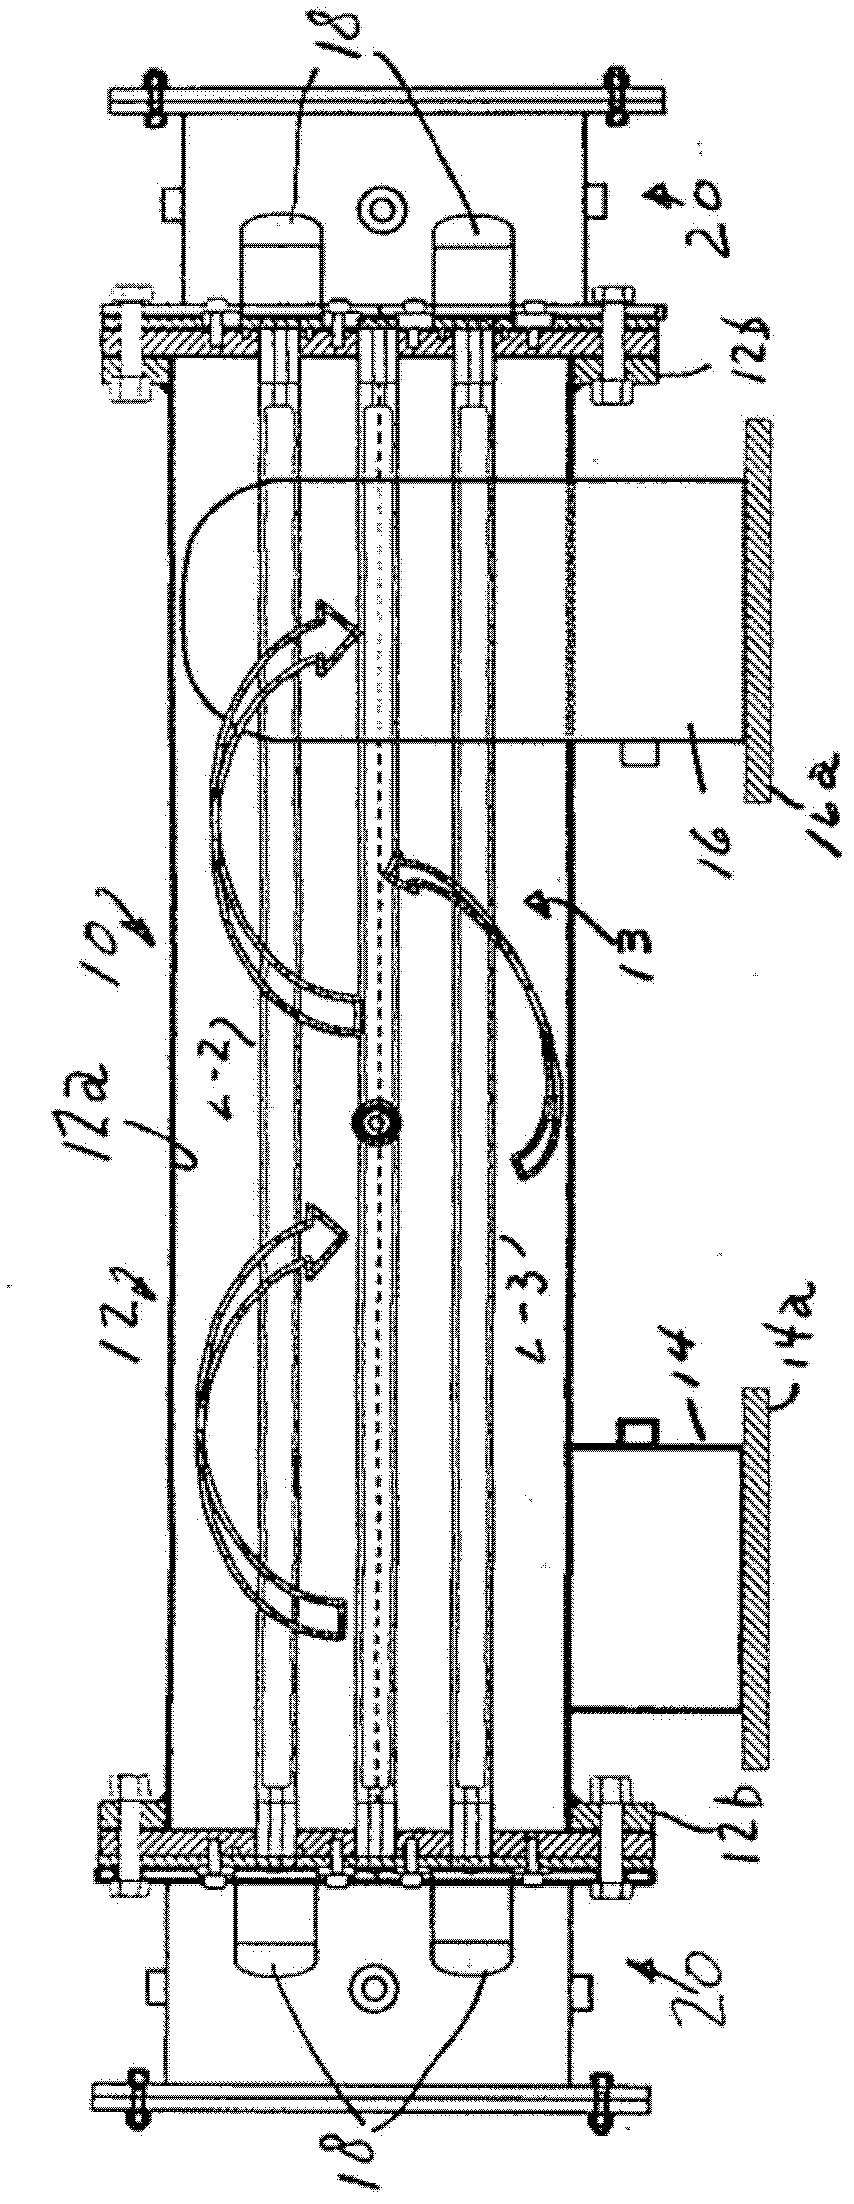 Apparatus for installation of ultraviolet system for ballast water treatment in explosive atmosphere of shipboard pump rooms and offshore platforms